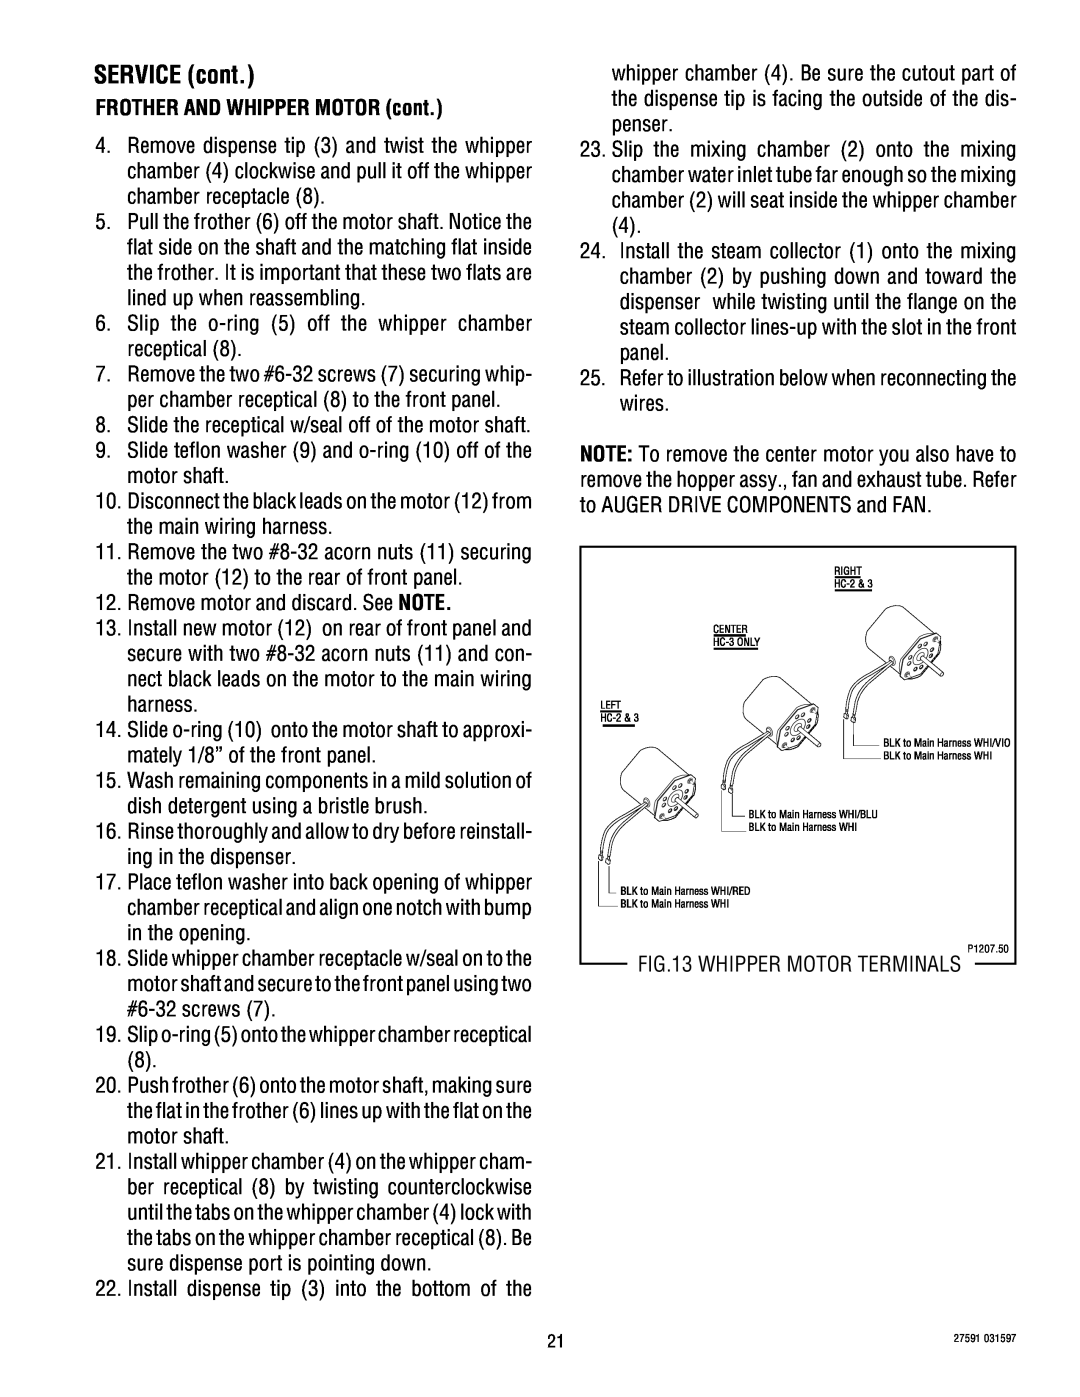 Bunn HC-3 service manual FROTHER AND WHIPPER MOTOR cont, SERVICE cont 